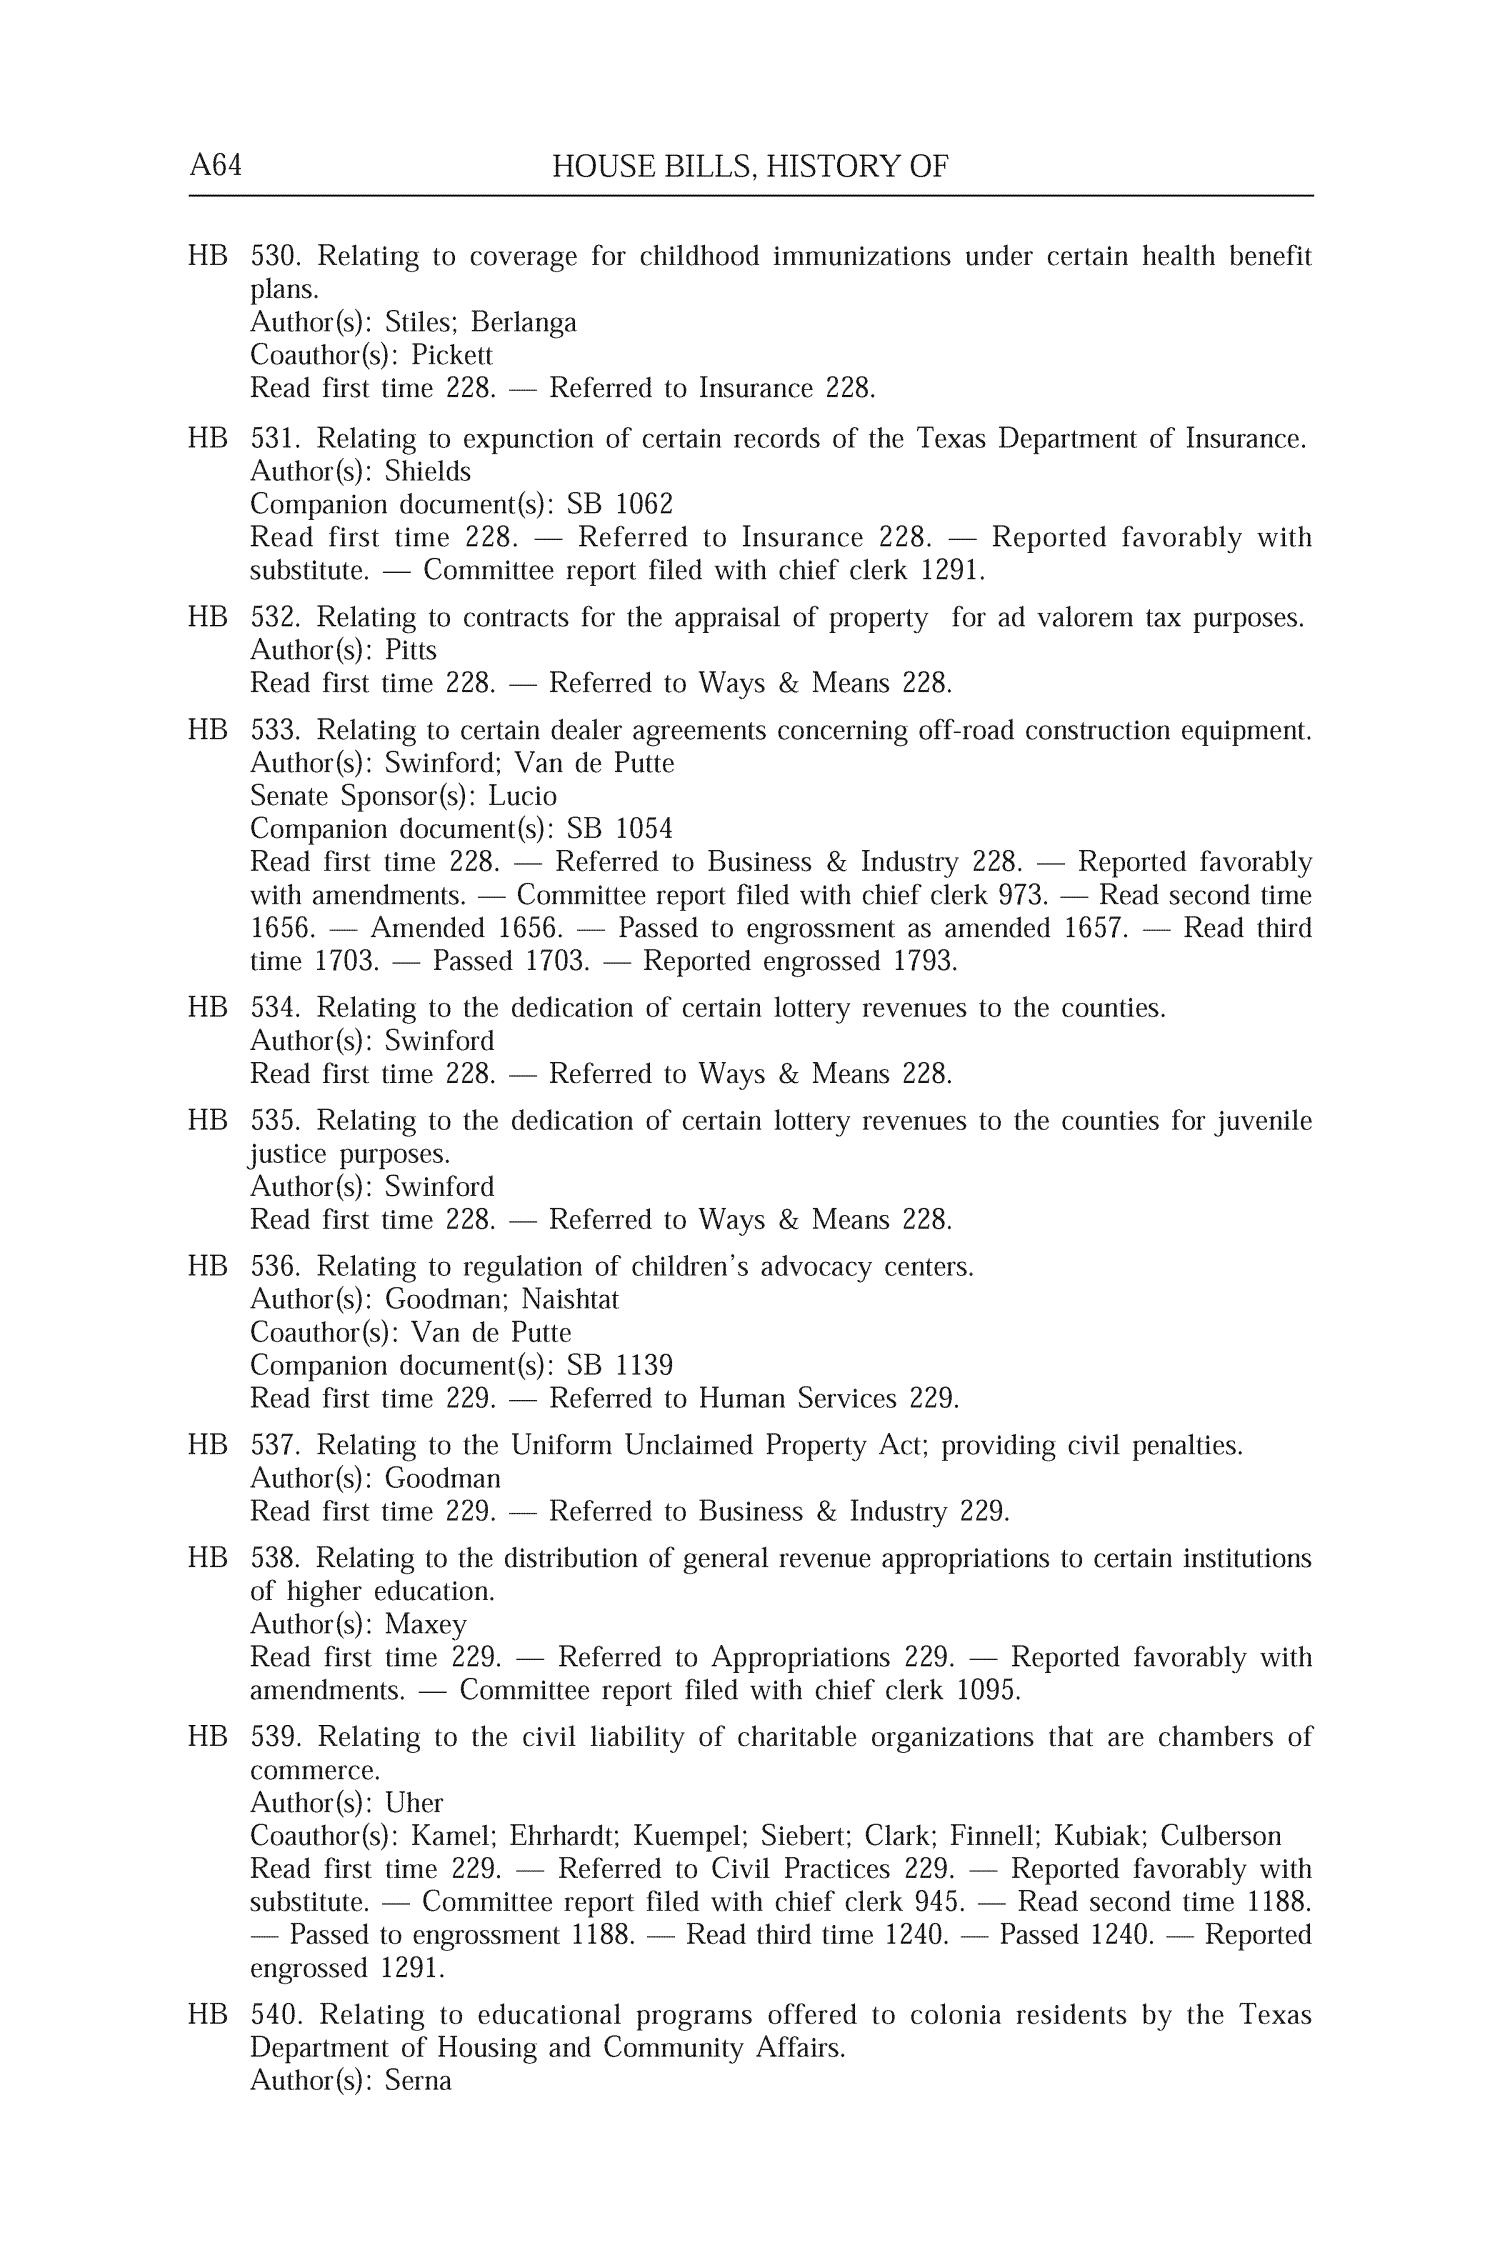 Journal of the House of Representatives of the Regular Session of the Seventy-Fifth Legislature of the State of Texas, Volume 5
                                                
                                                    64
                                                